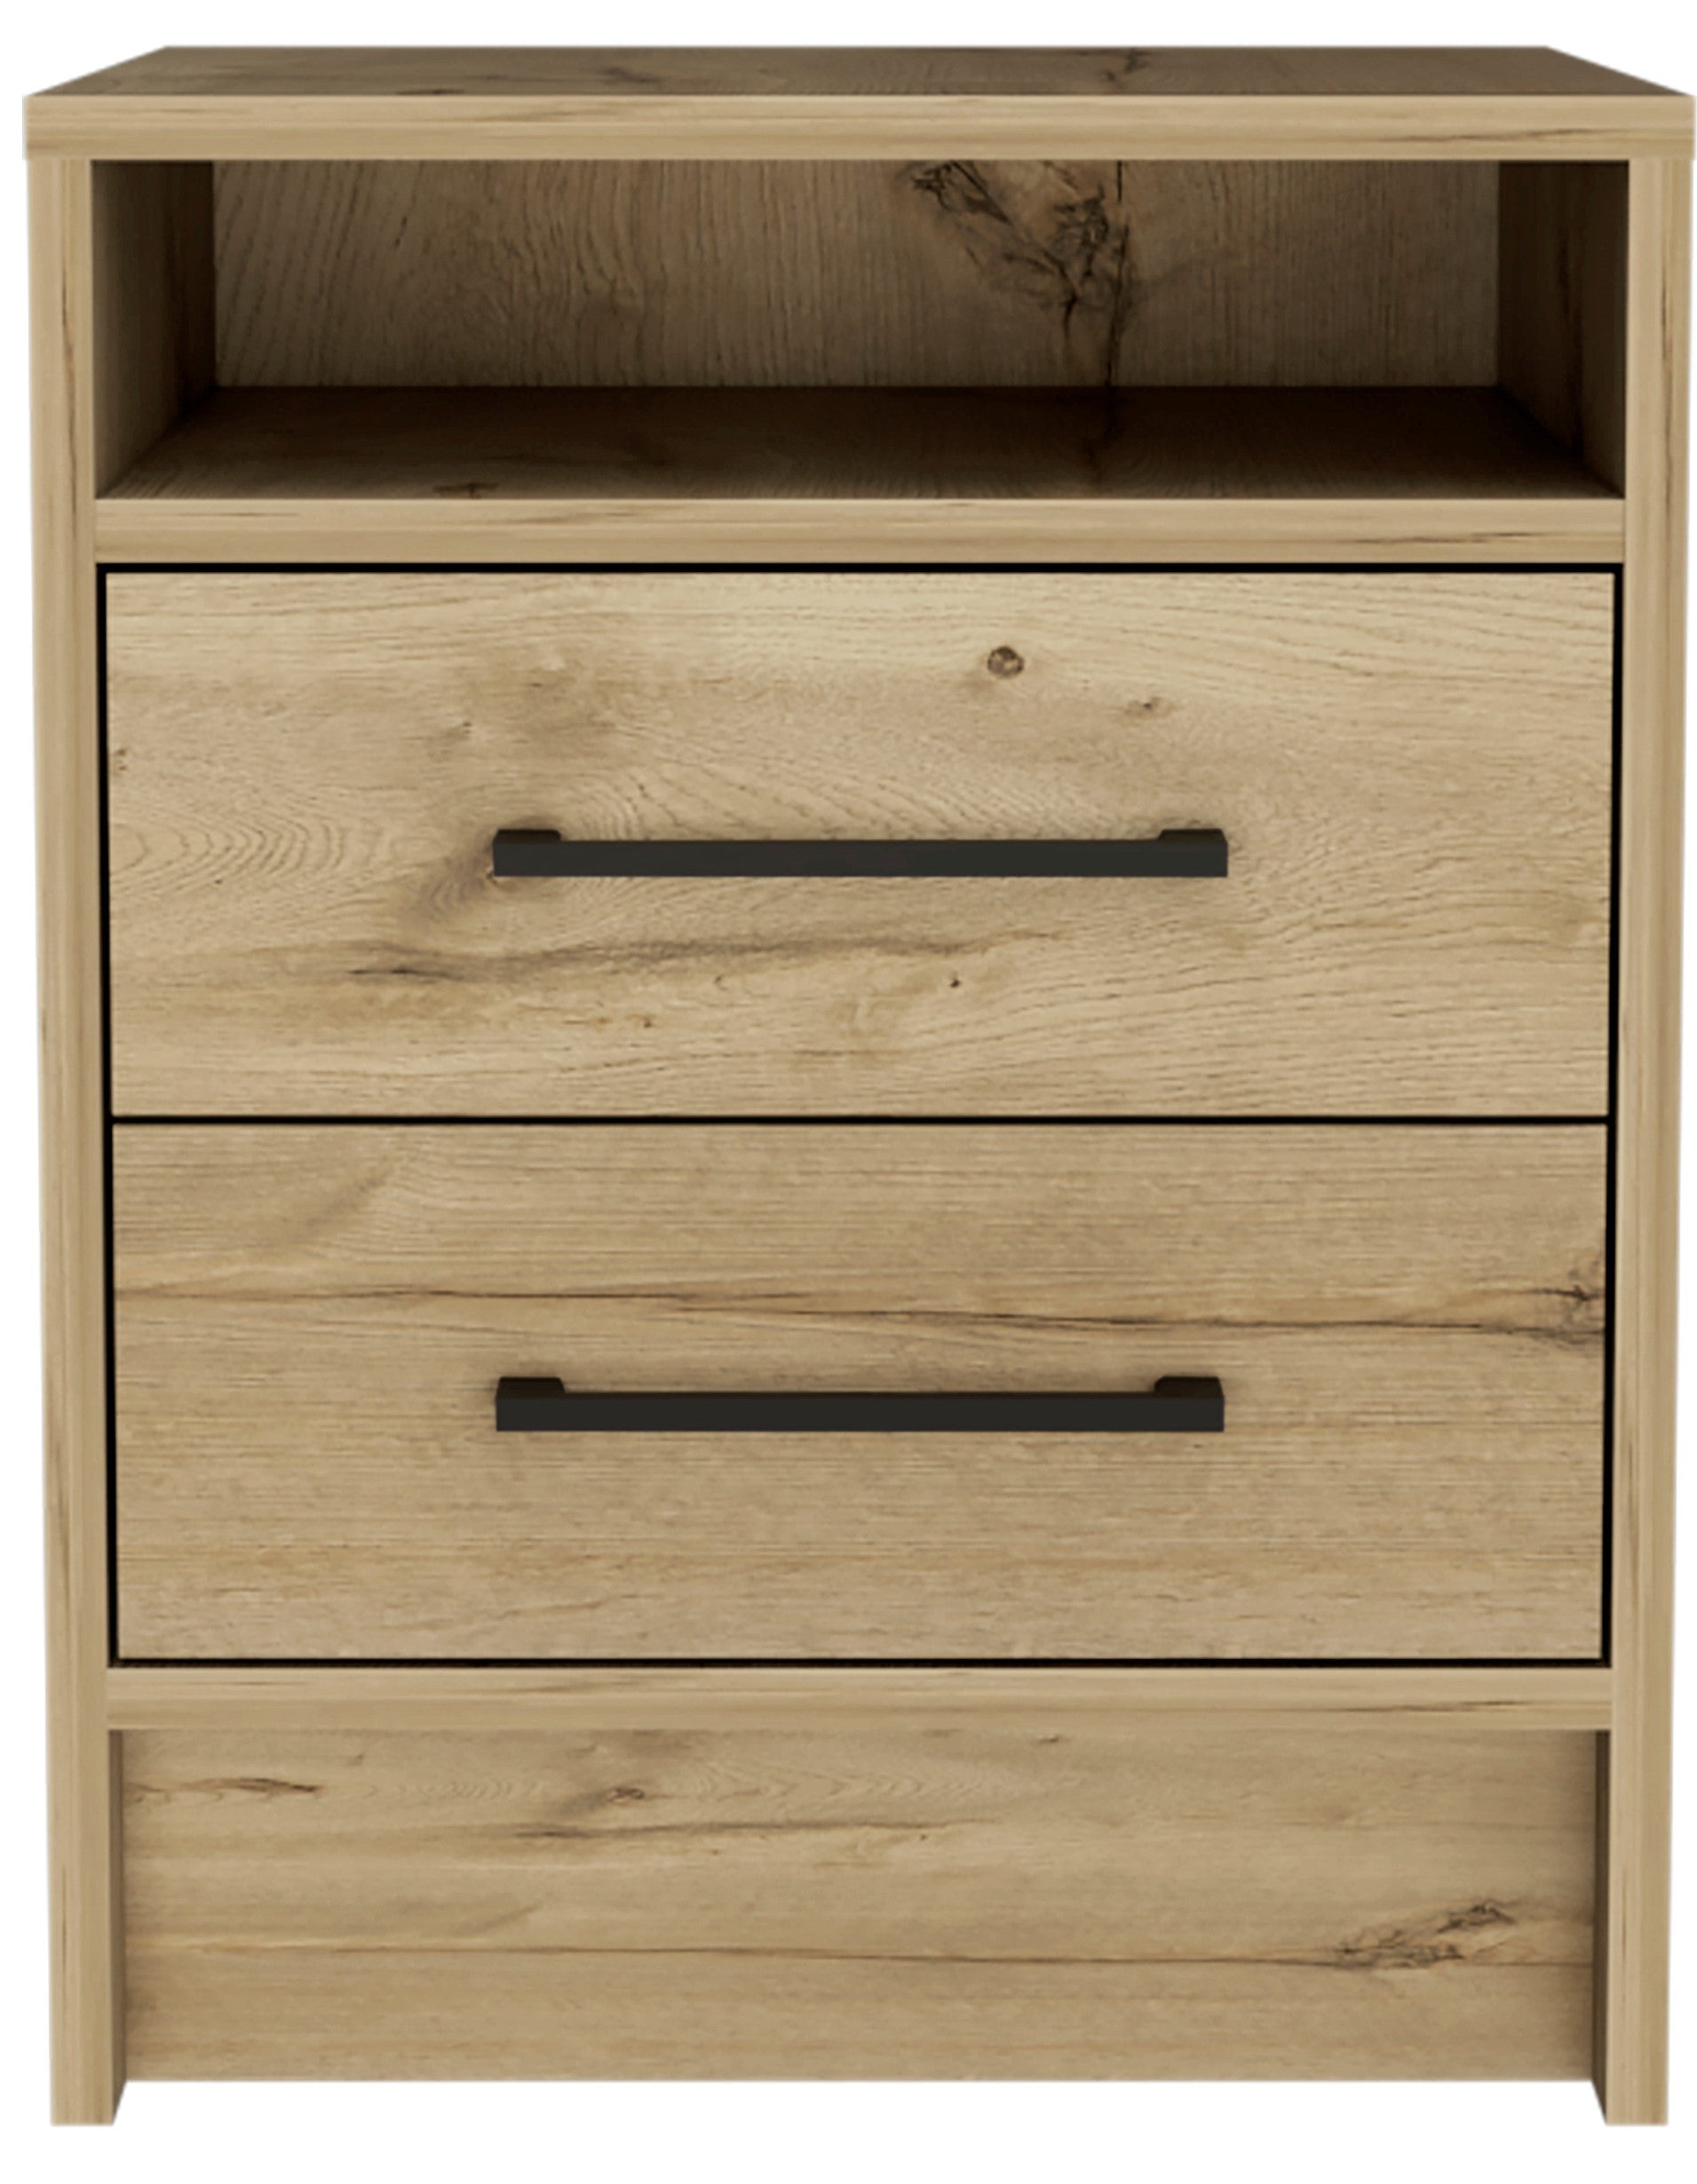 Sophisticated and Stylish Light Grey Nightstand